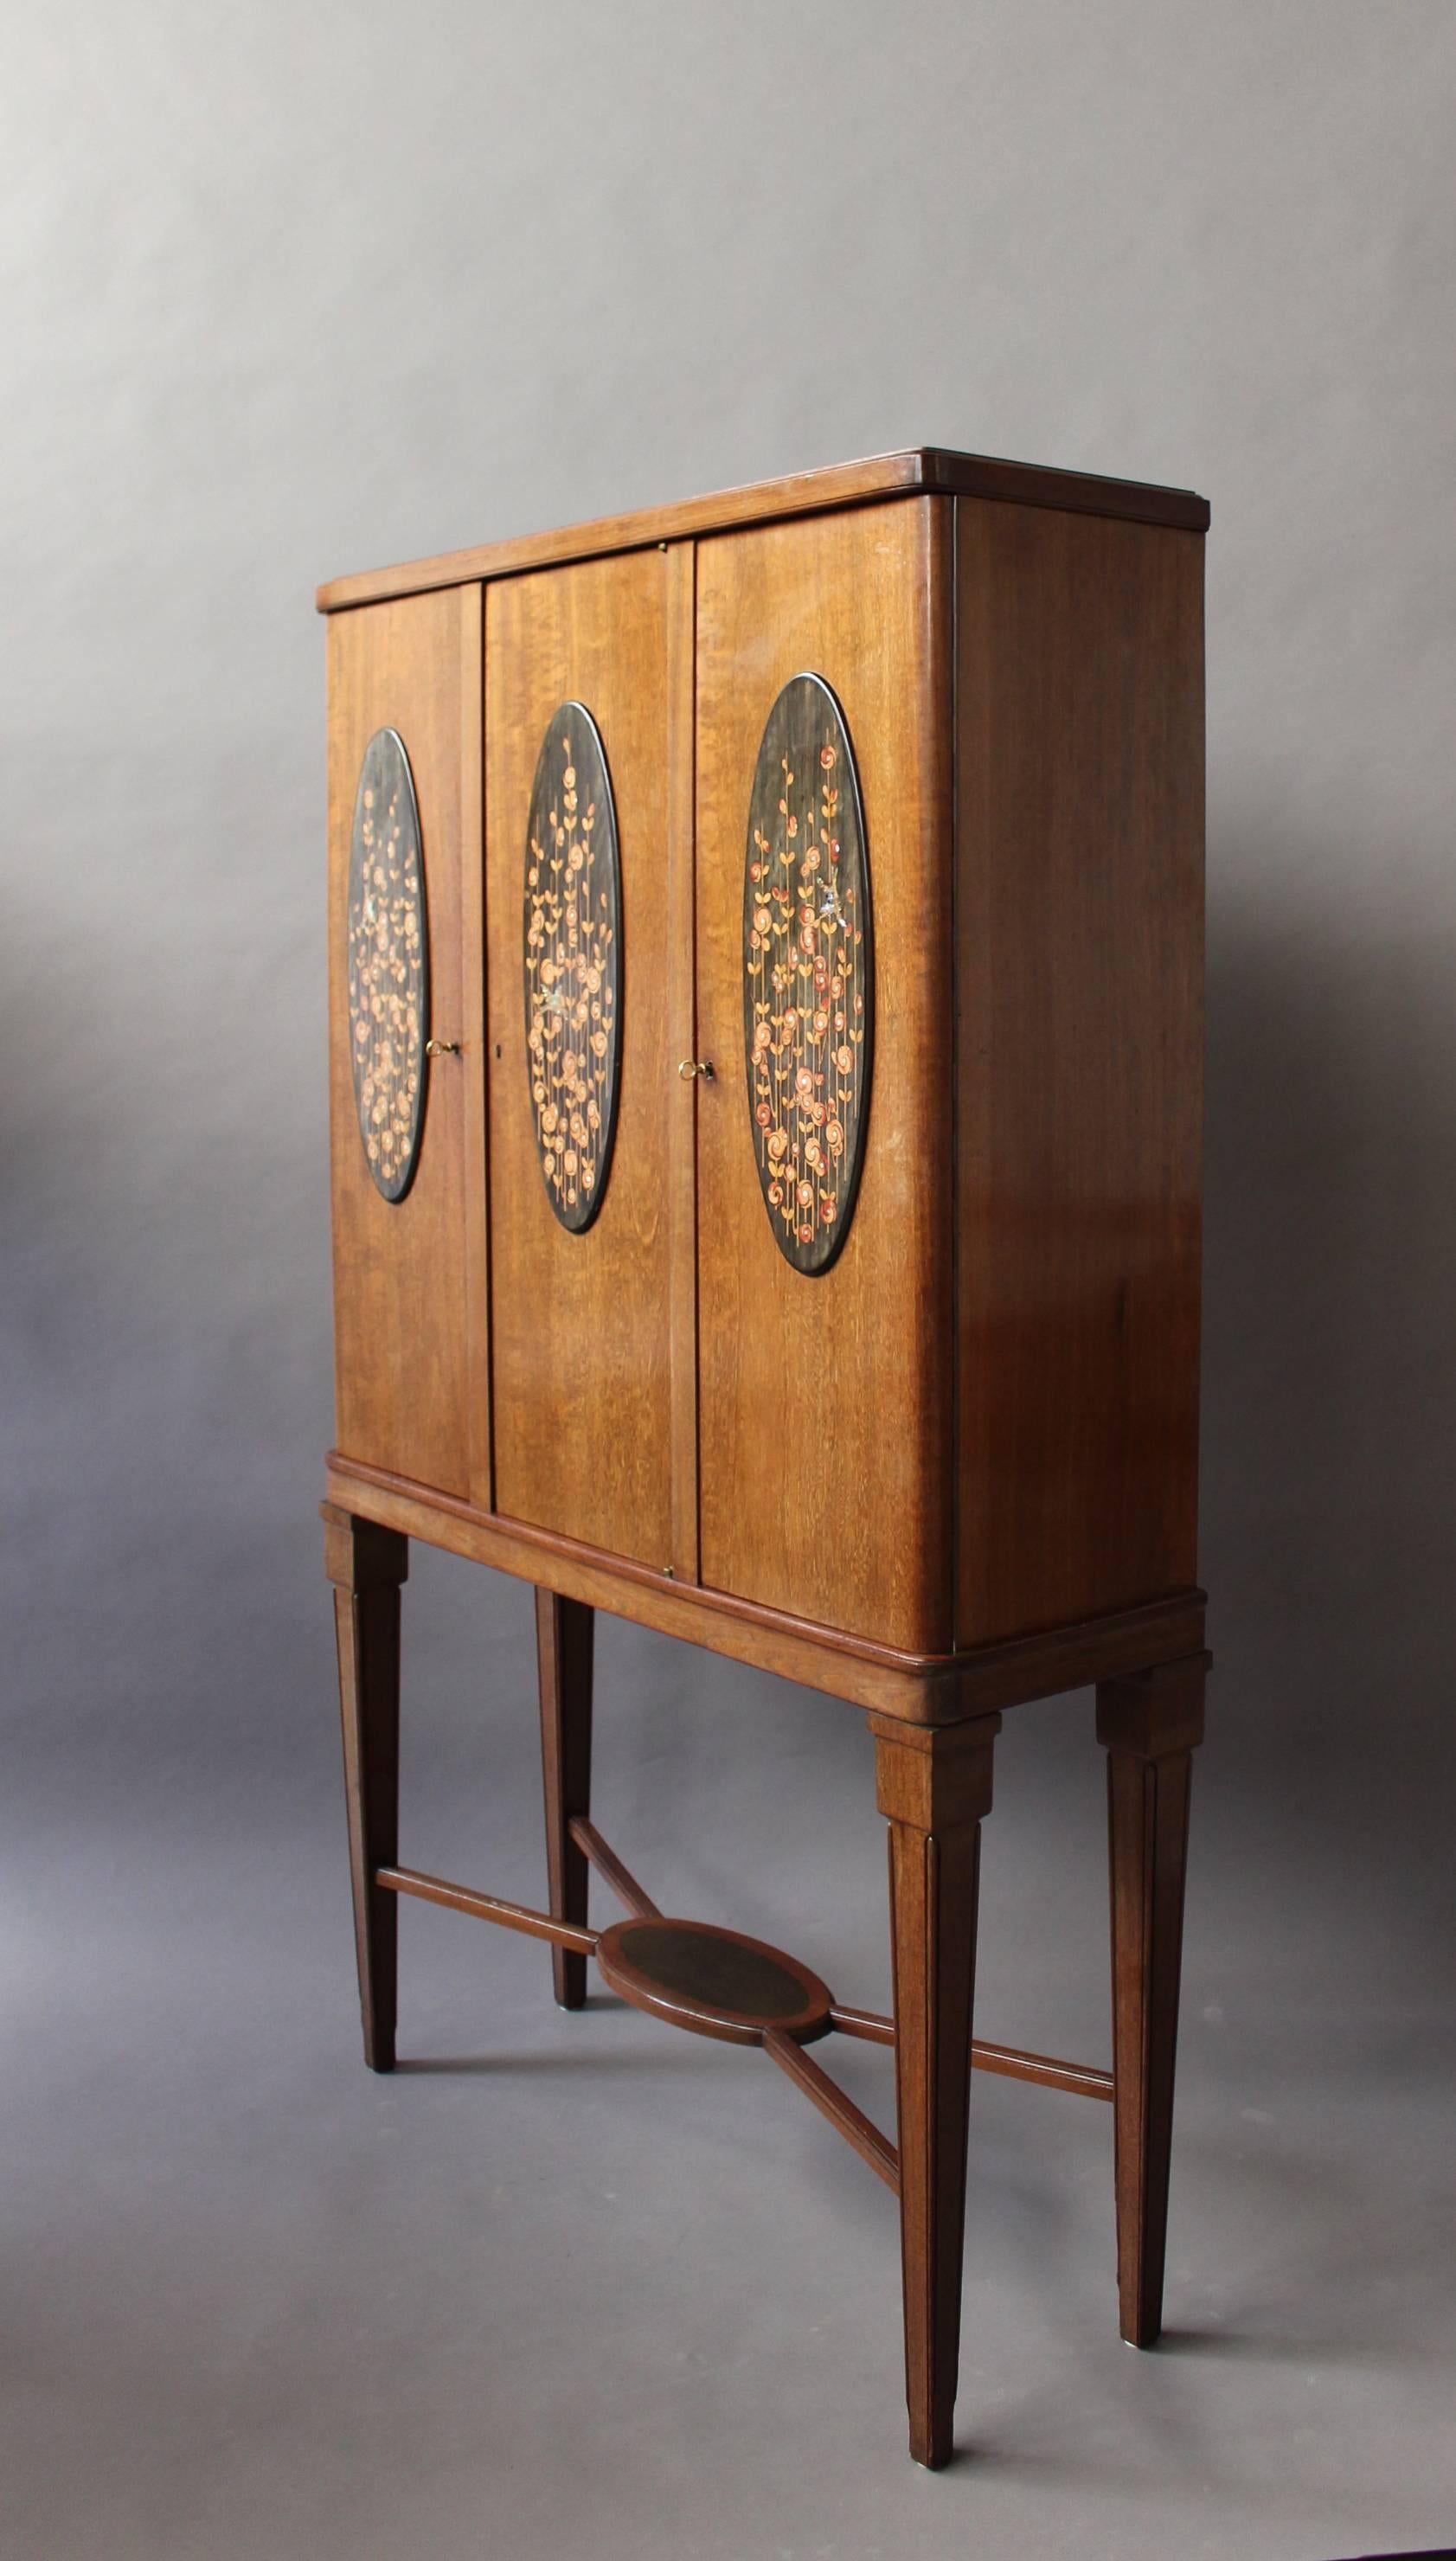 A fine French Art Deco three doors amaranth cabinet by Maurice Dufrene.
Each door decorated with a floral marquetry oval panel.
Interior is bird's-eye maple veneered.